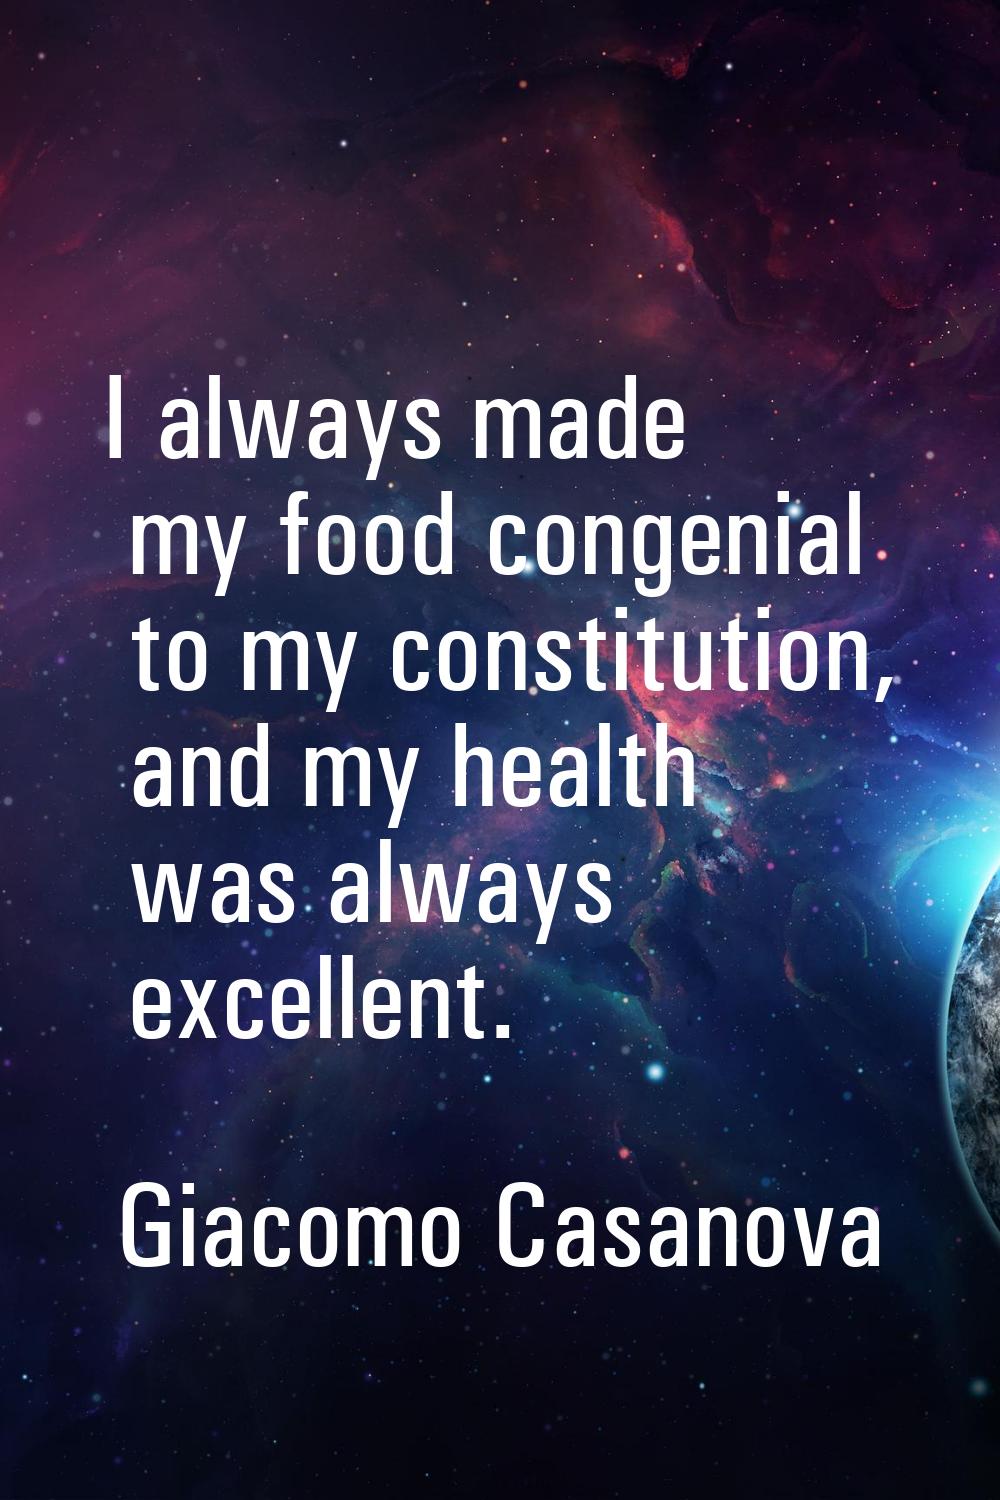 I always made my food congenial to my constitution, and my health was always excellent.